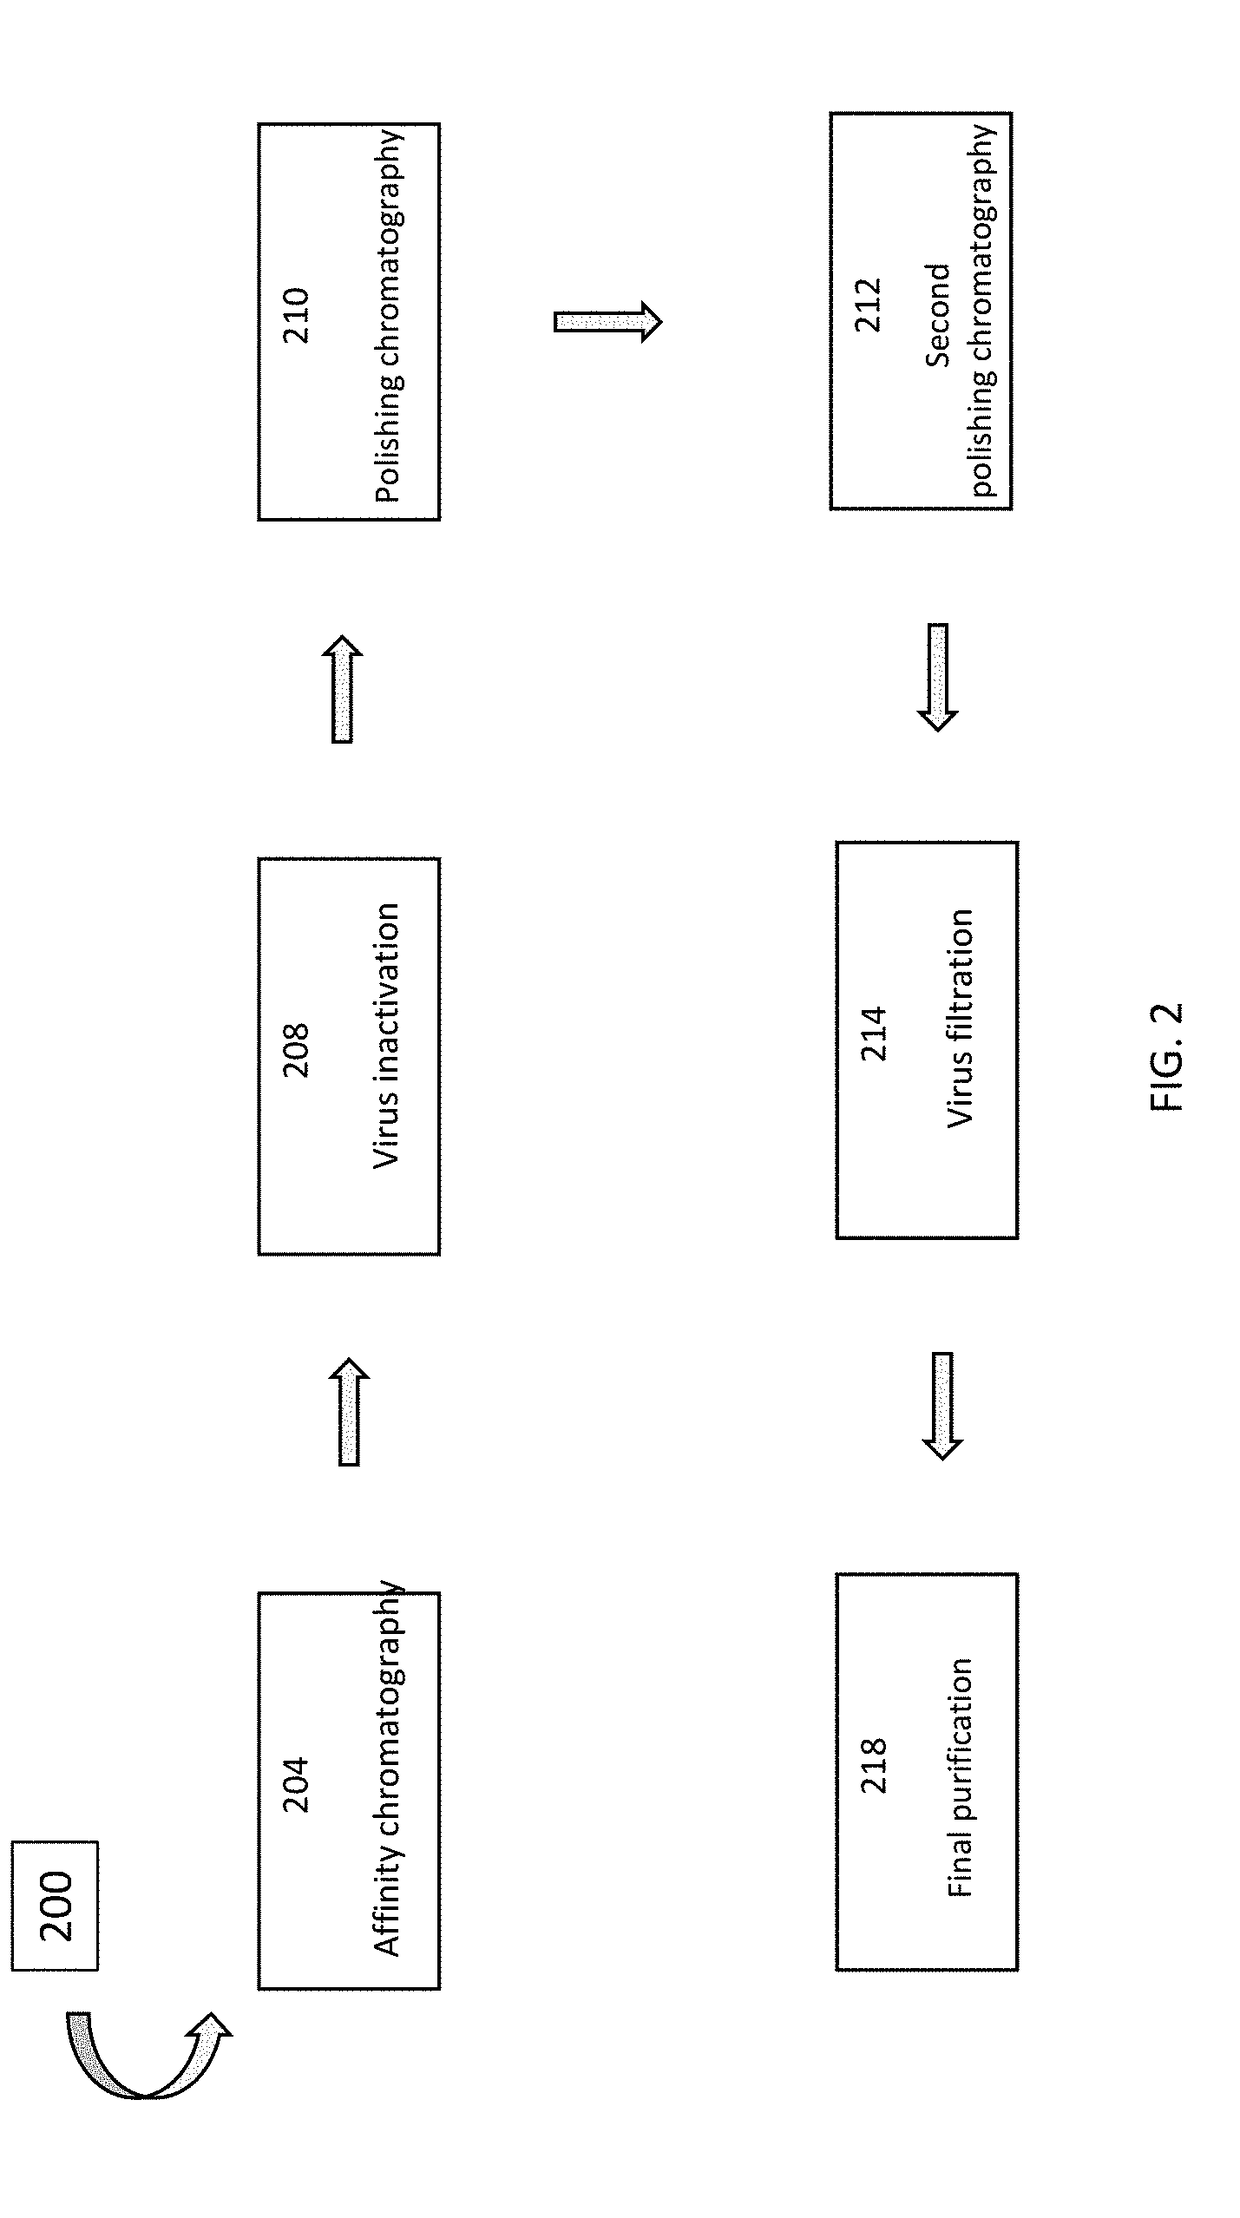 Excipient compounds for protein processing